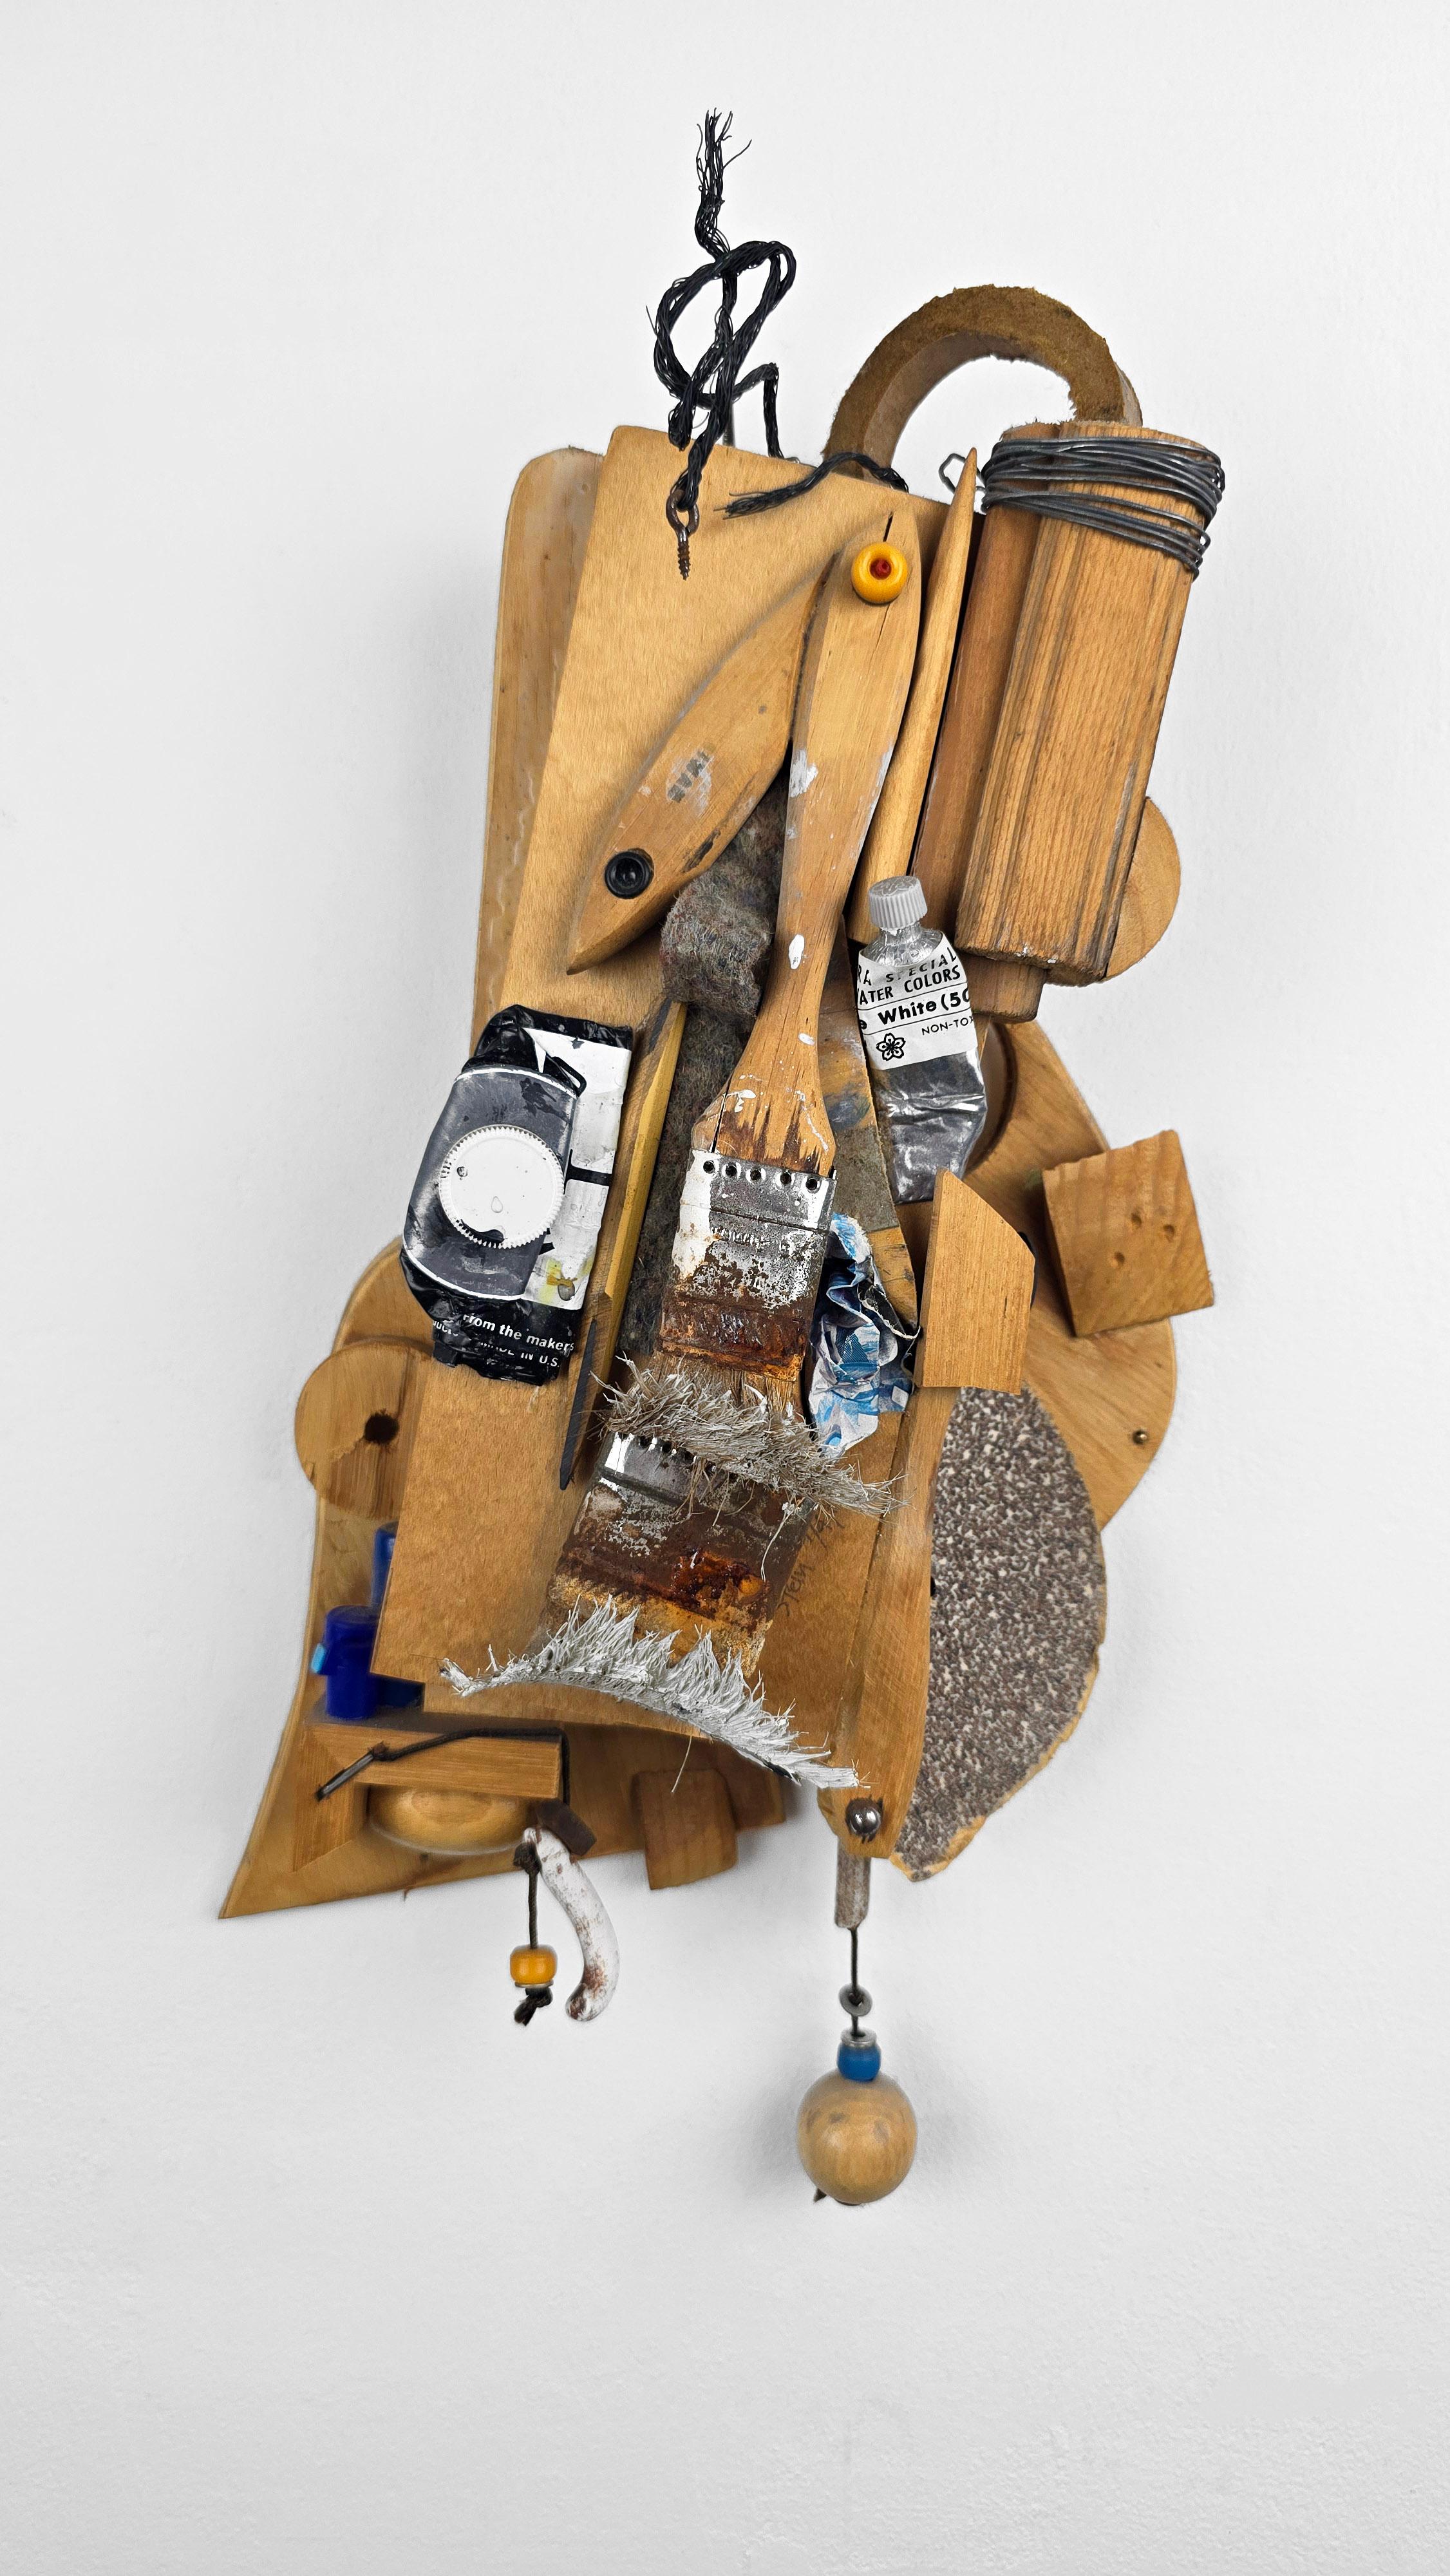 Abstract Sculpture Linda Stein - Intimate Duo 134 - Mixed Media Assemblage Contemporary Art Wall Sculpture